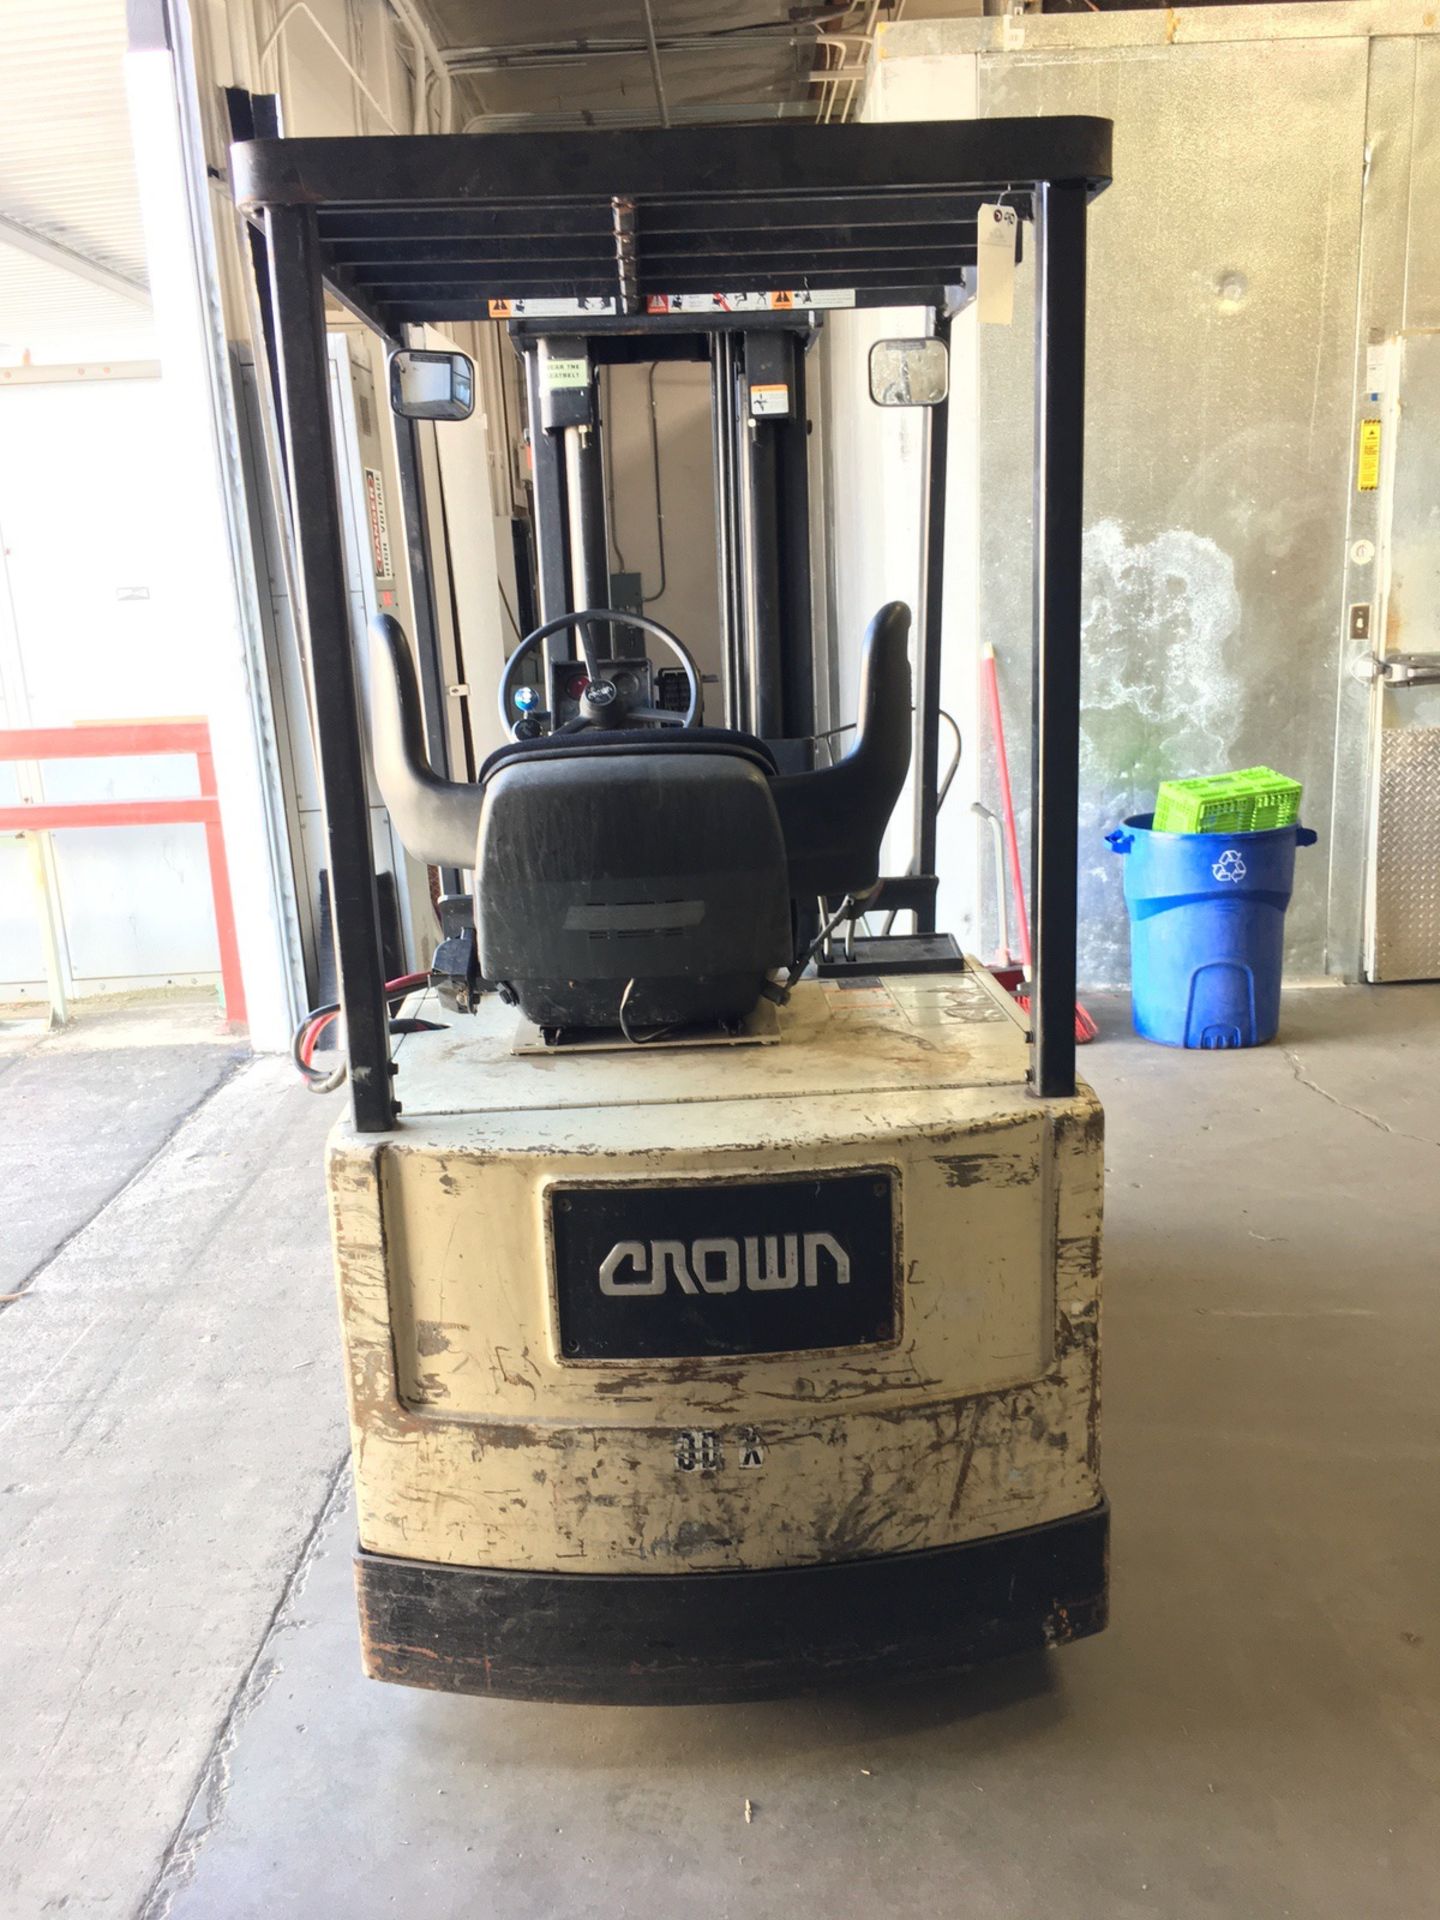 Crown SC Forklift, 3500 LB Capacity, 190in Max Height, 1695.9 (Delay Delivery) | Rig Fee: No Charge - Image 13 of 19